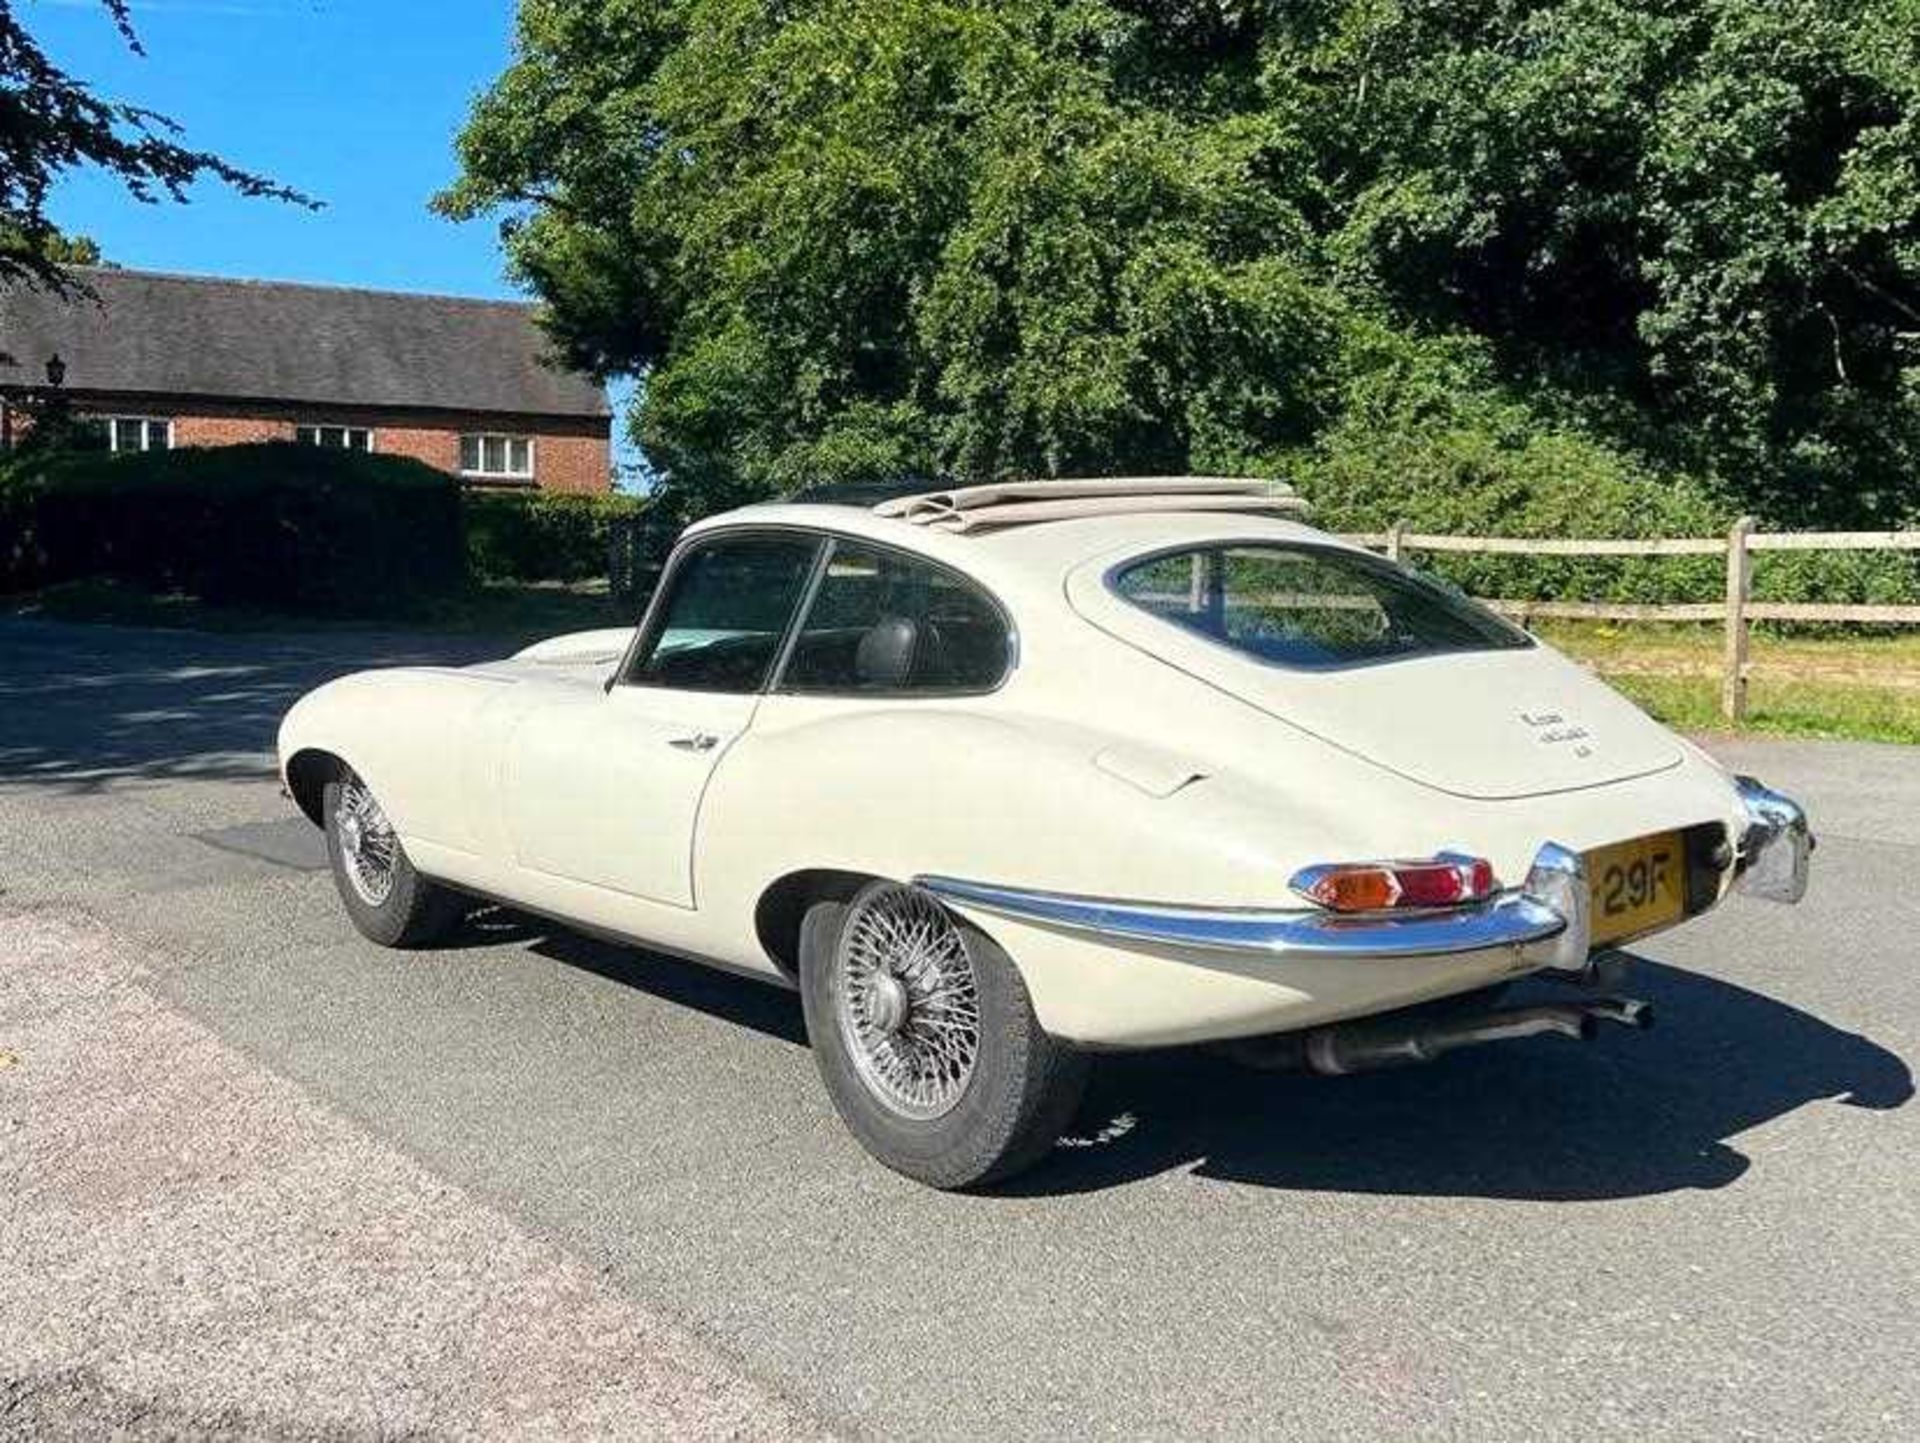 1968 Jaguar E-Type 4.2 Coupe Current ownership for more than 28 years - Image 10 of 24